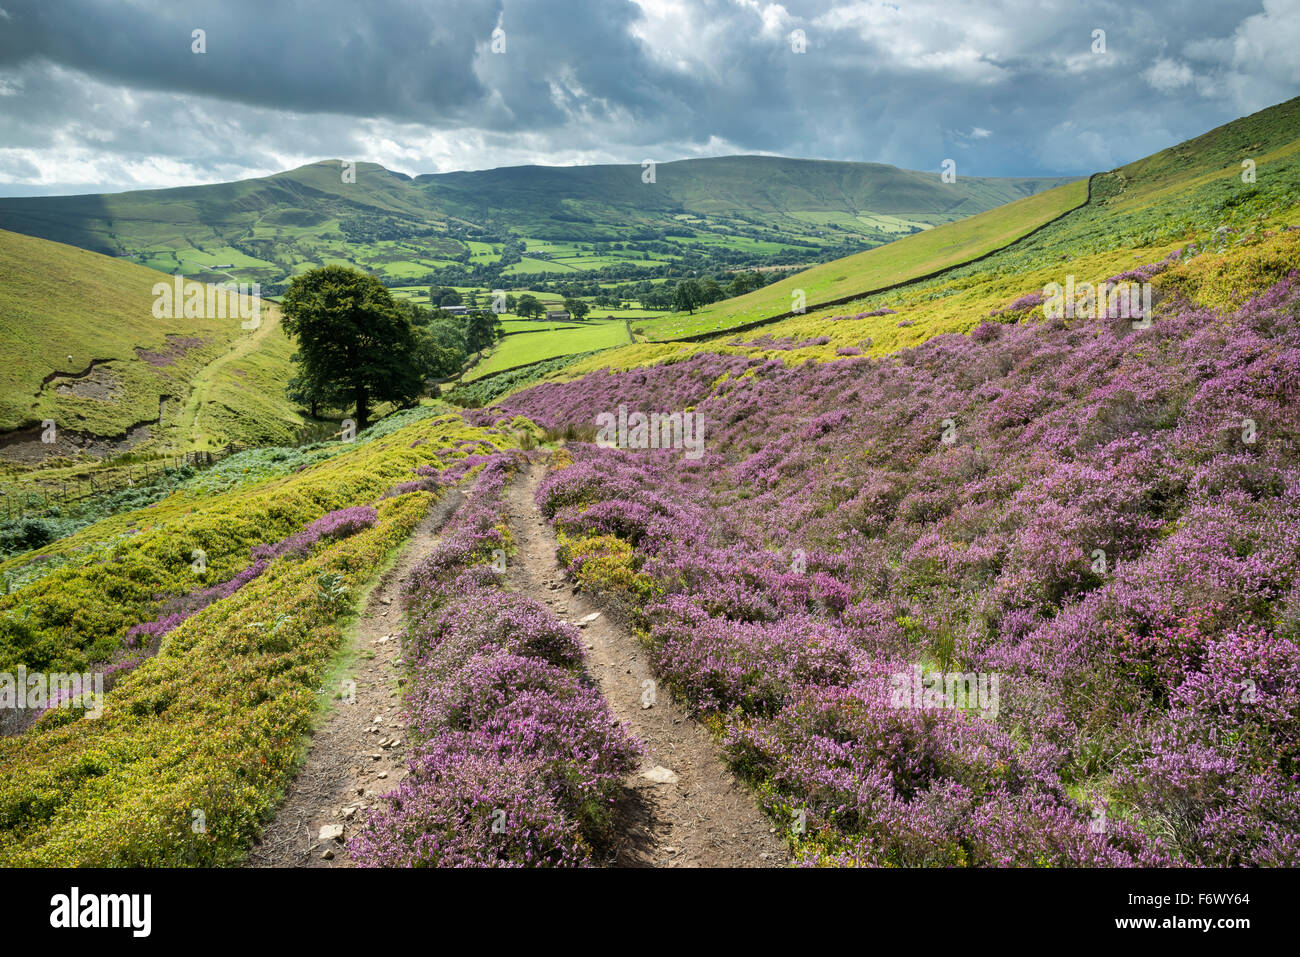 Well worn footpath leading down into the vale of Edale in the Peak District, Derbyshire. Heather in bloom beside the path. Stock Photo